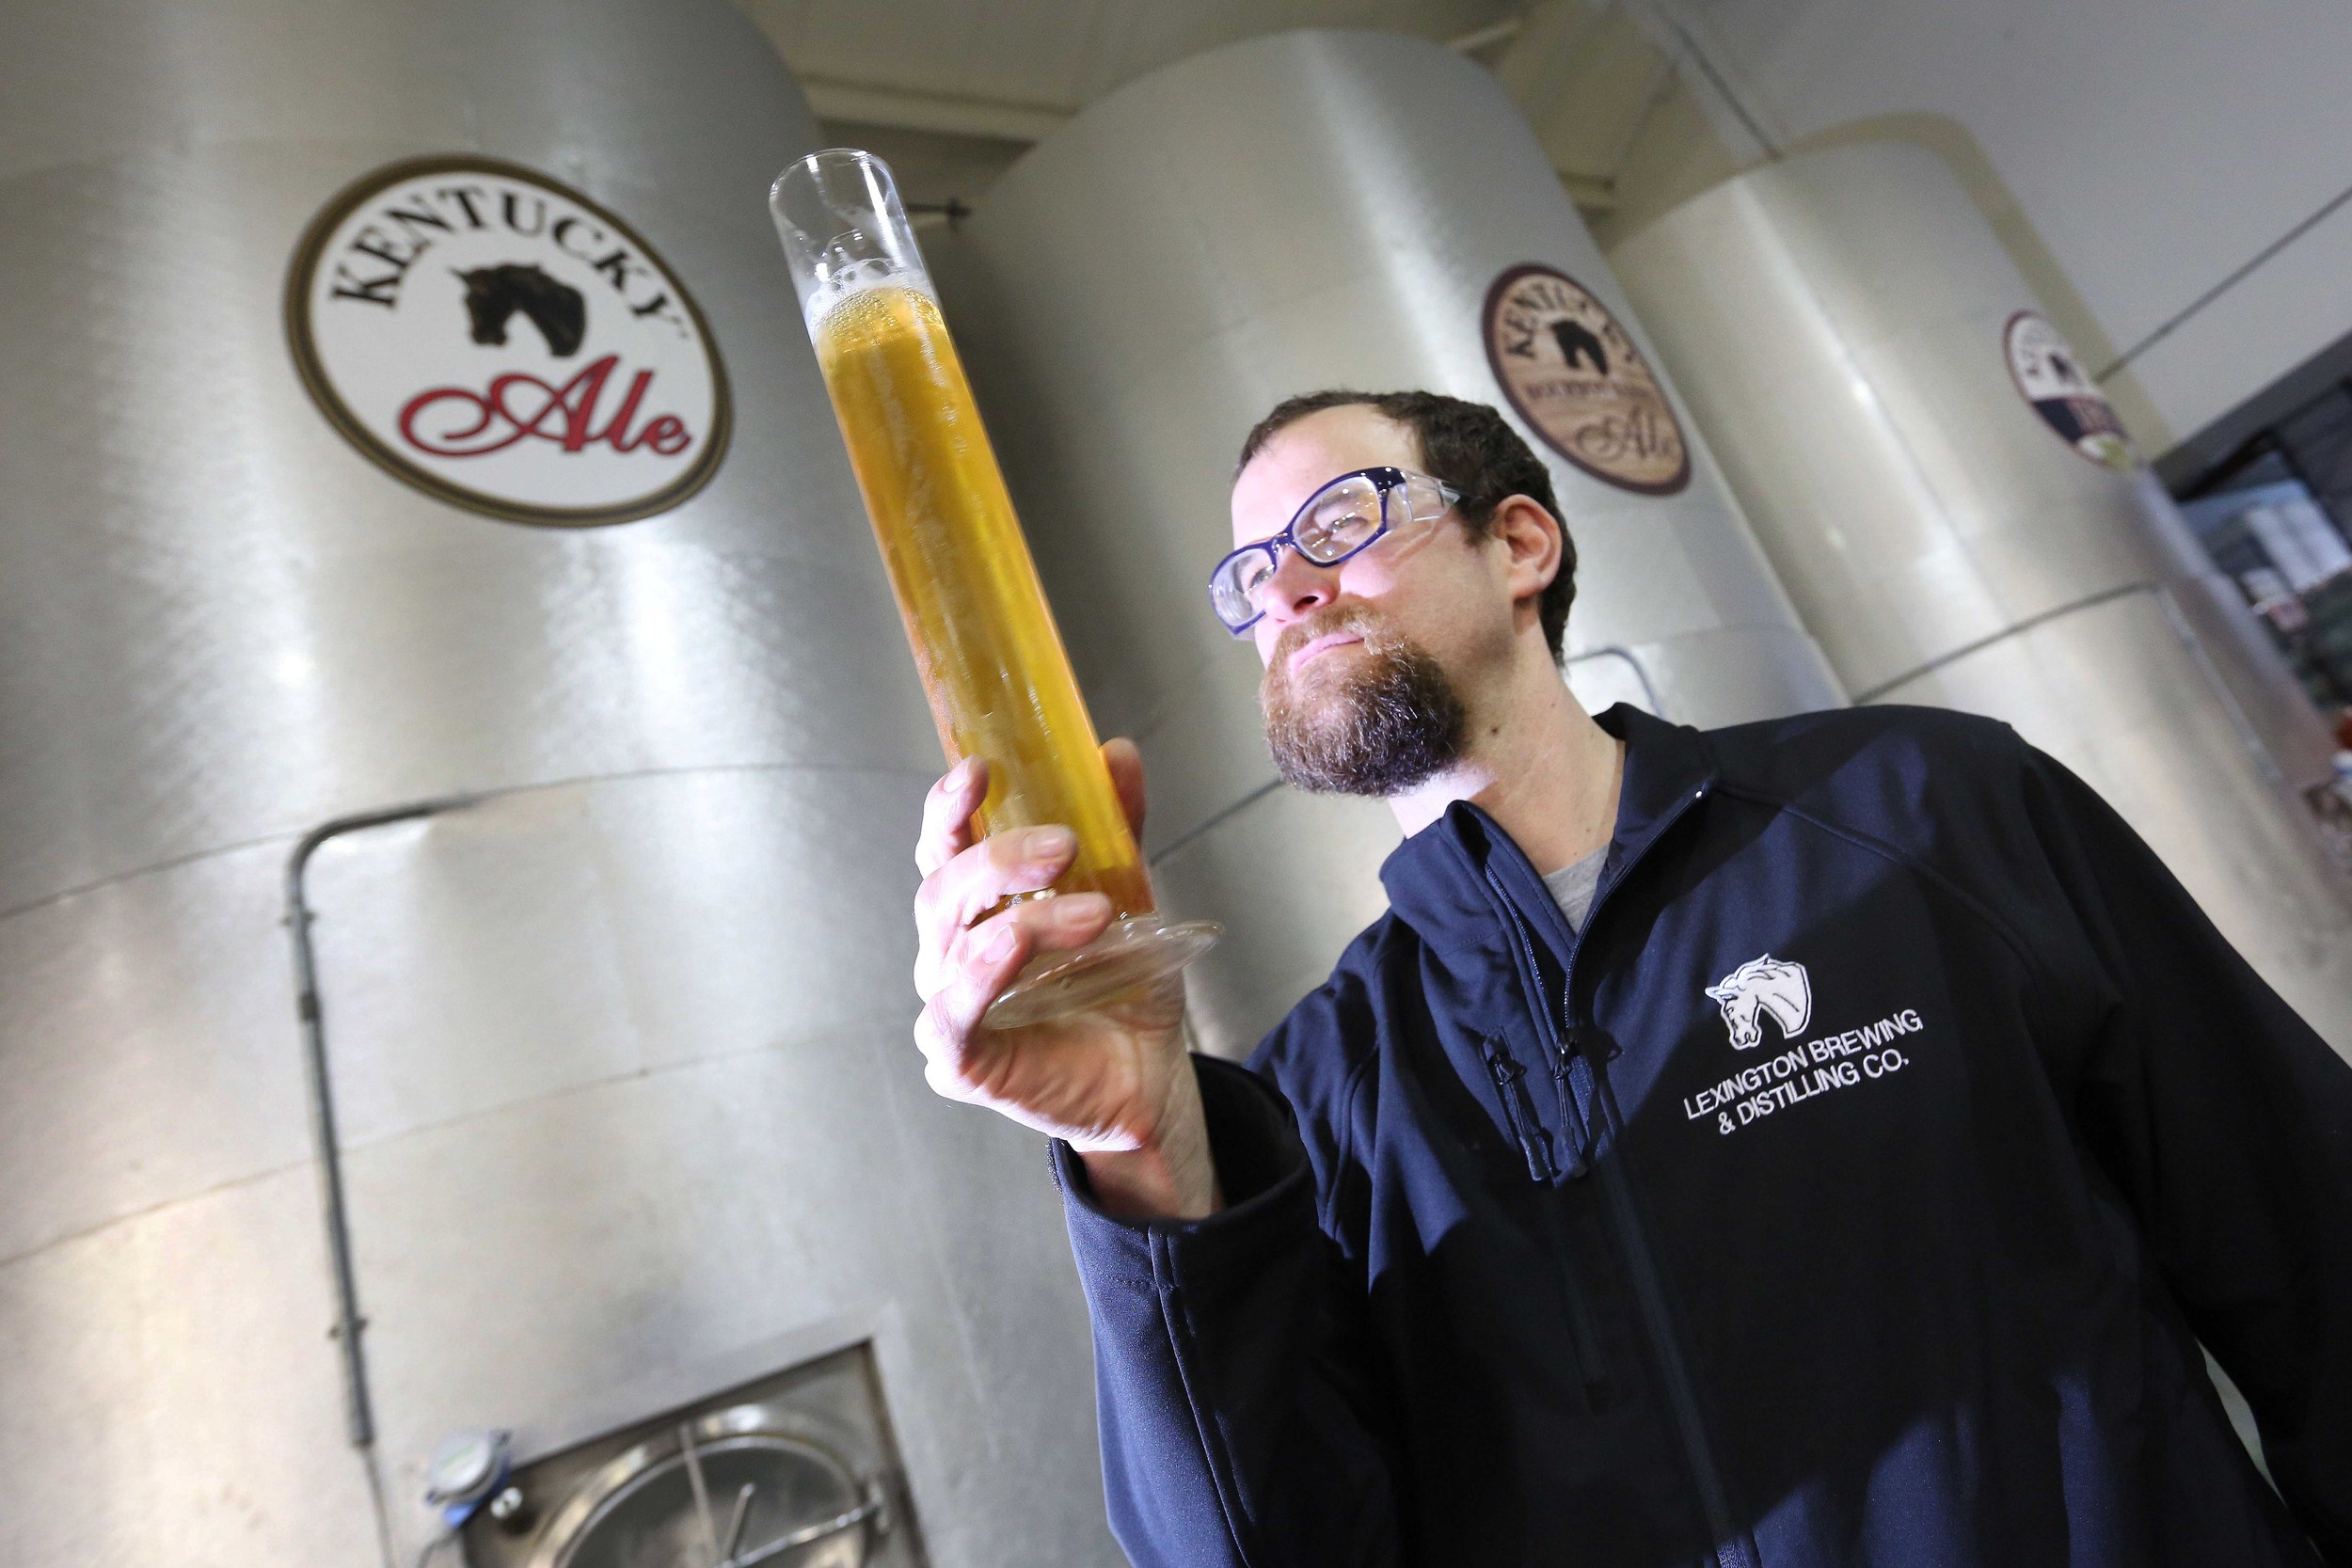  Brewer Andrew Jorgensen at the Station Works Brewery in Newry 